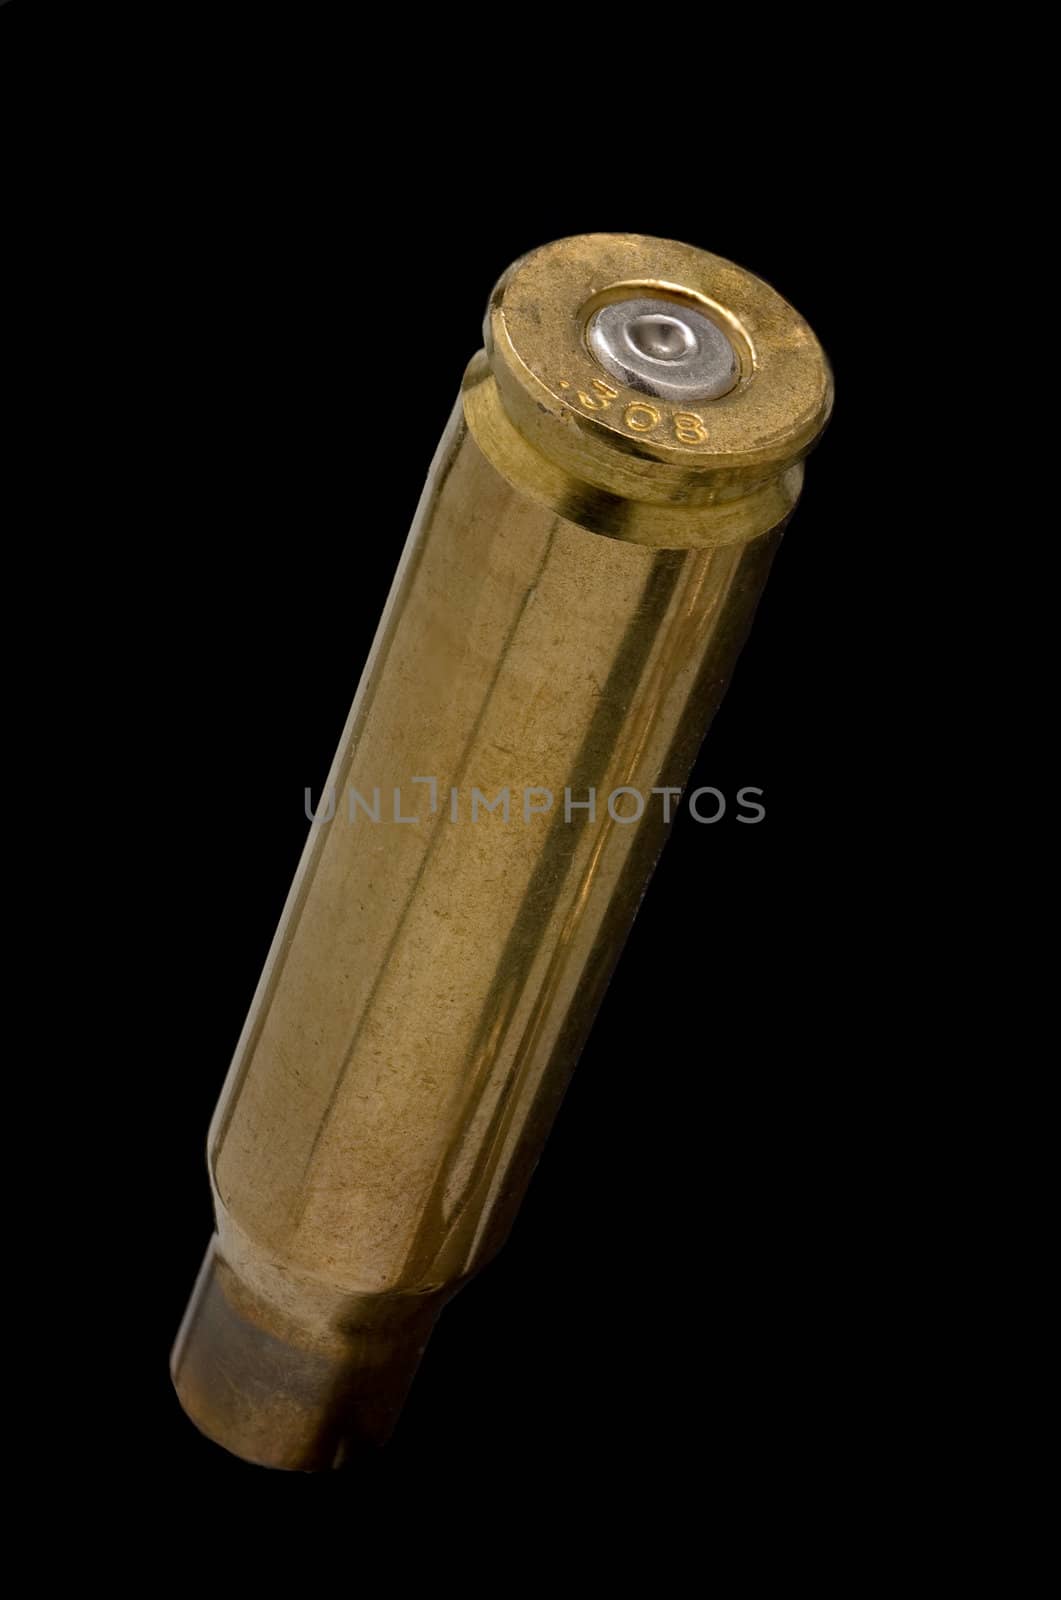 Dirty Used .308 shell casing on black